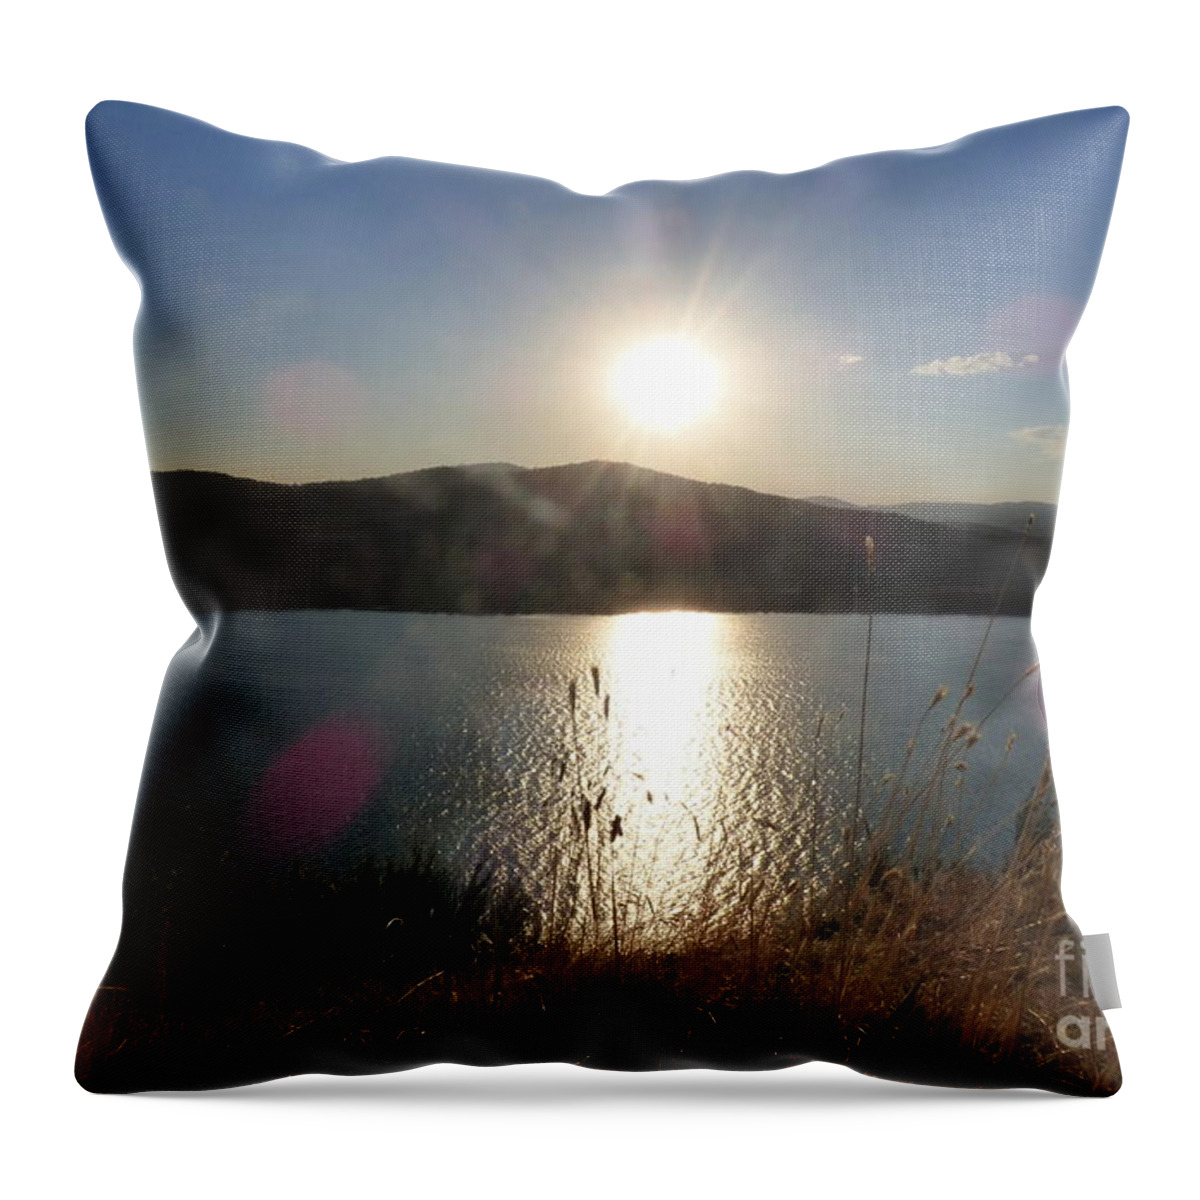 Lake Roosevelt Throw Pillow featuring the photograph Lake Roosevelt Sun by Charles Robinson